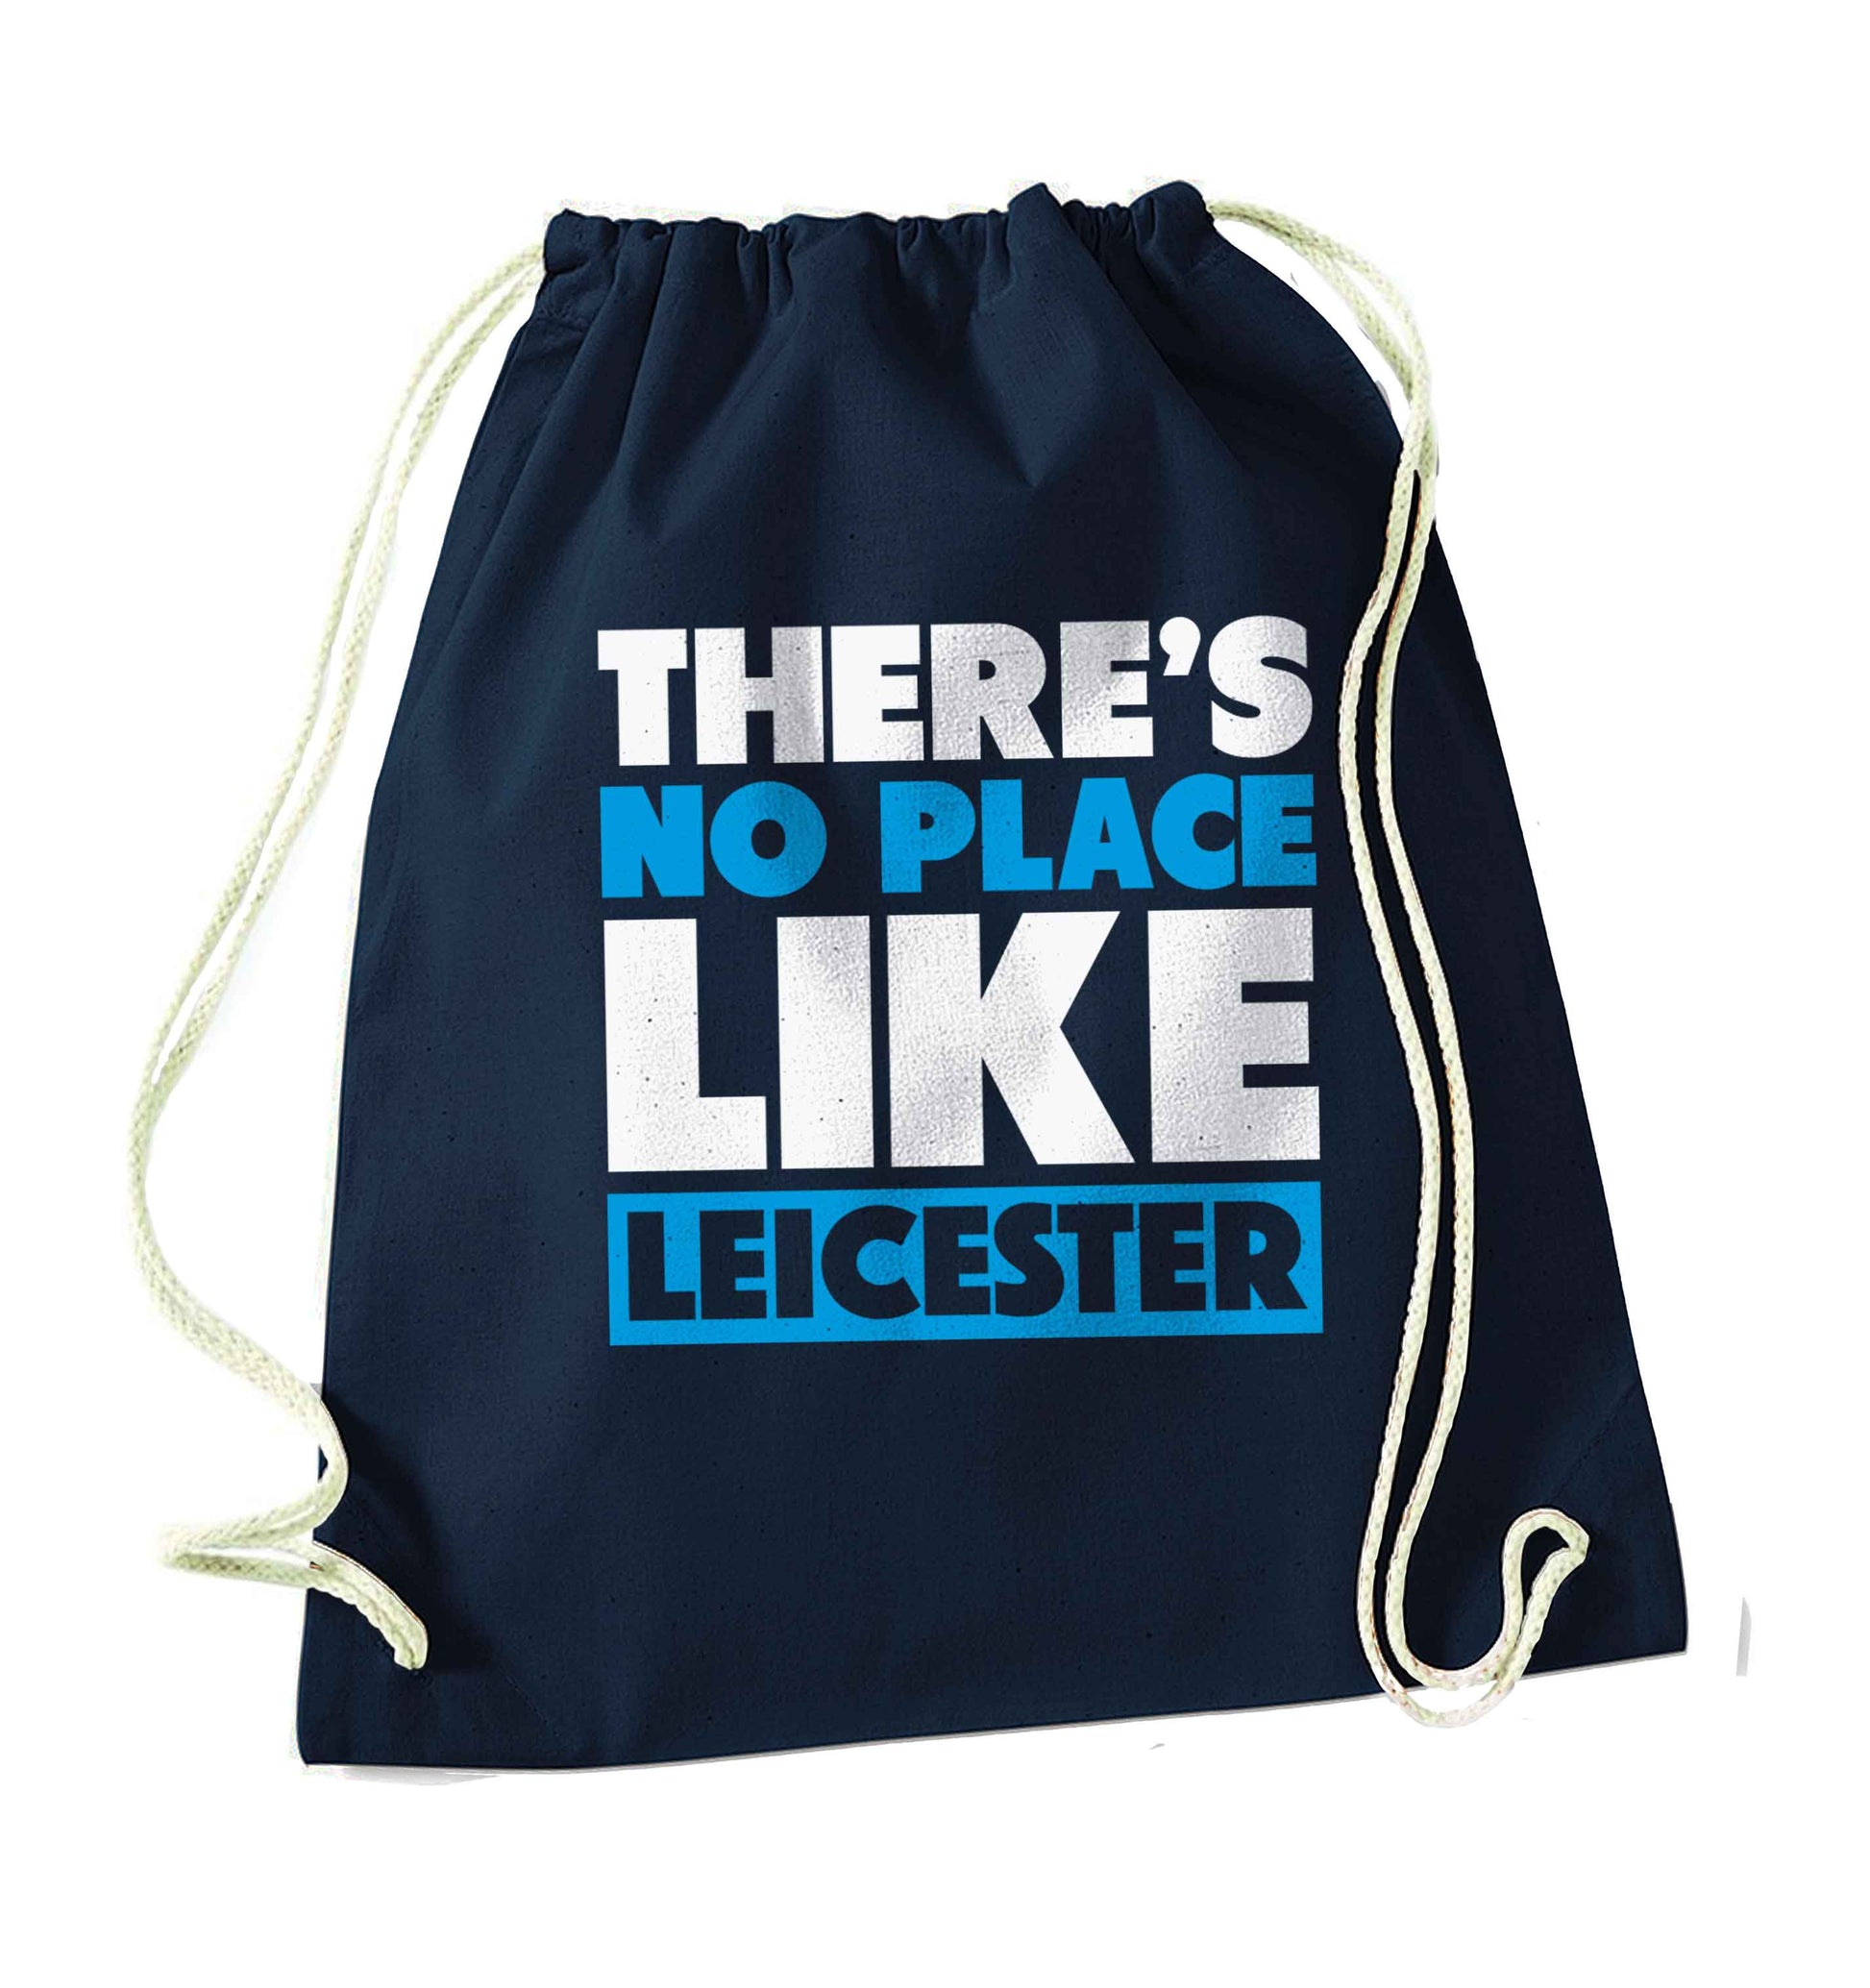 There's no place like Leicester navy drawstring bag